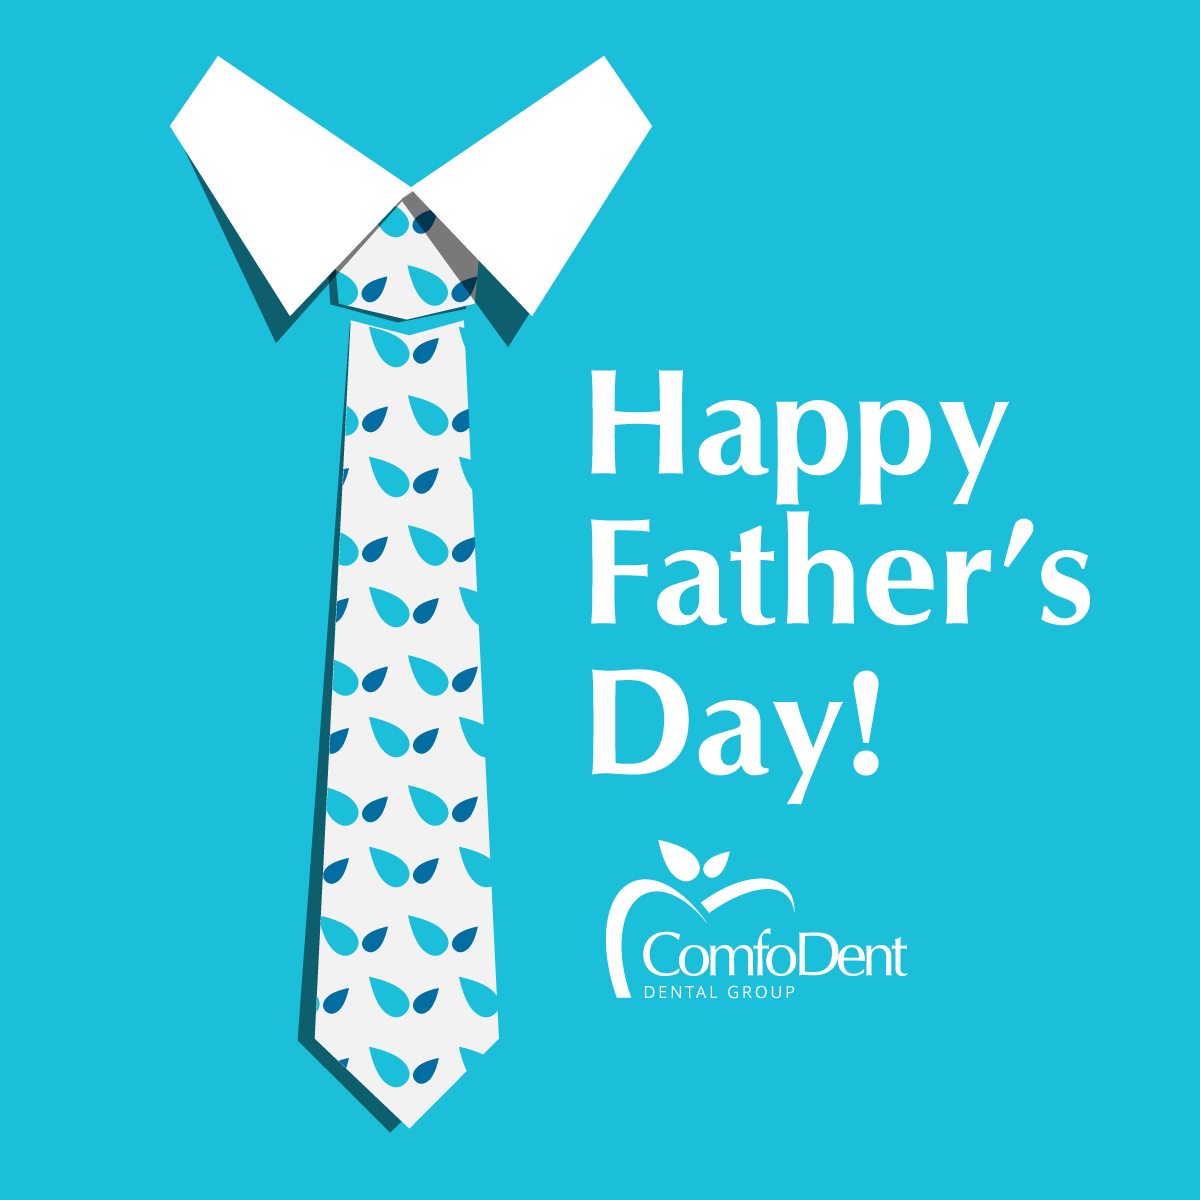 Happy Father's Day! ComfoDent Dental Group